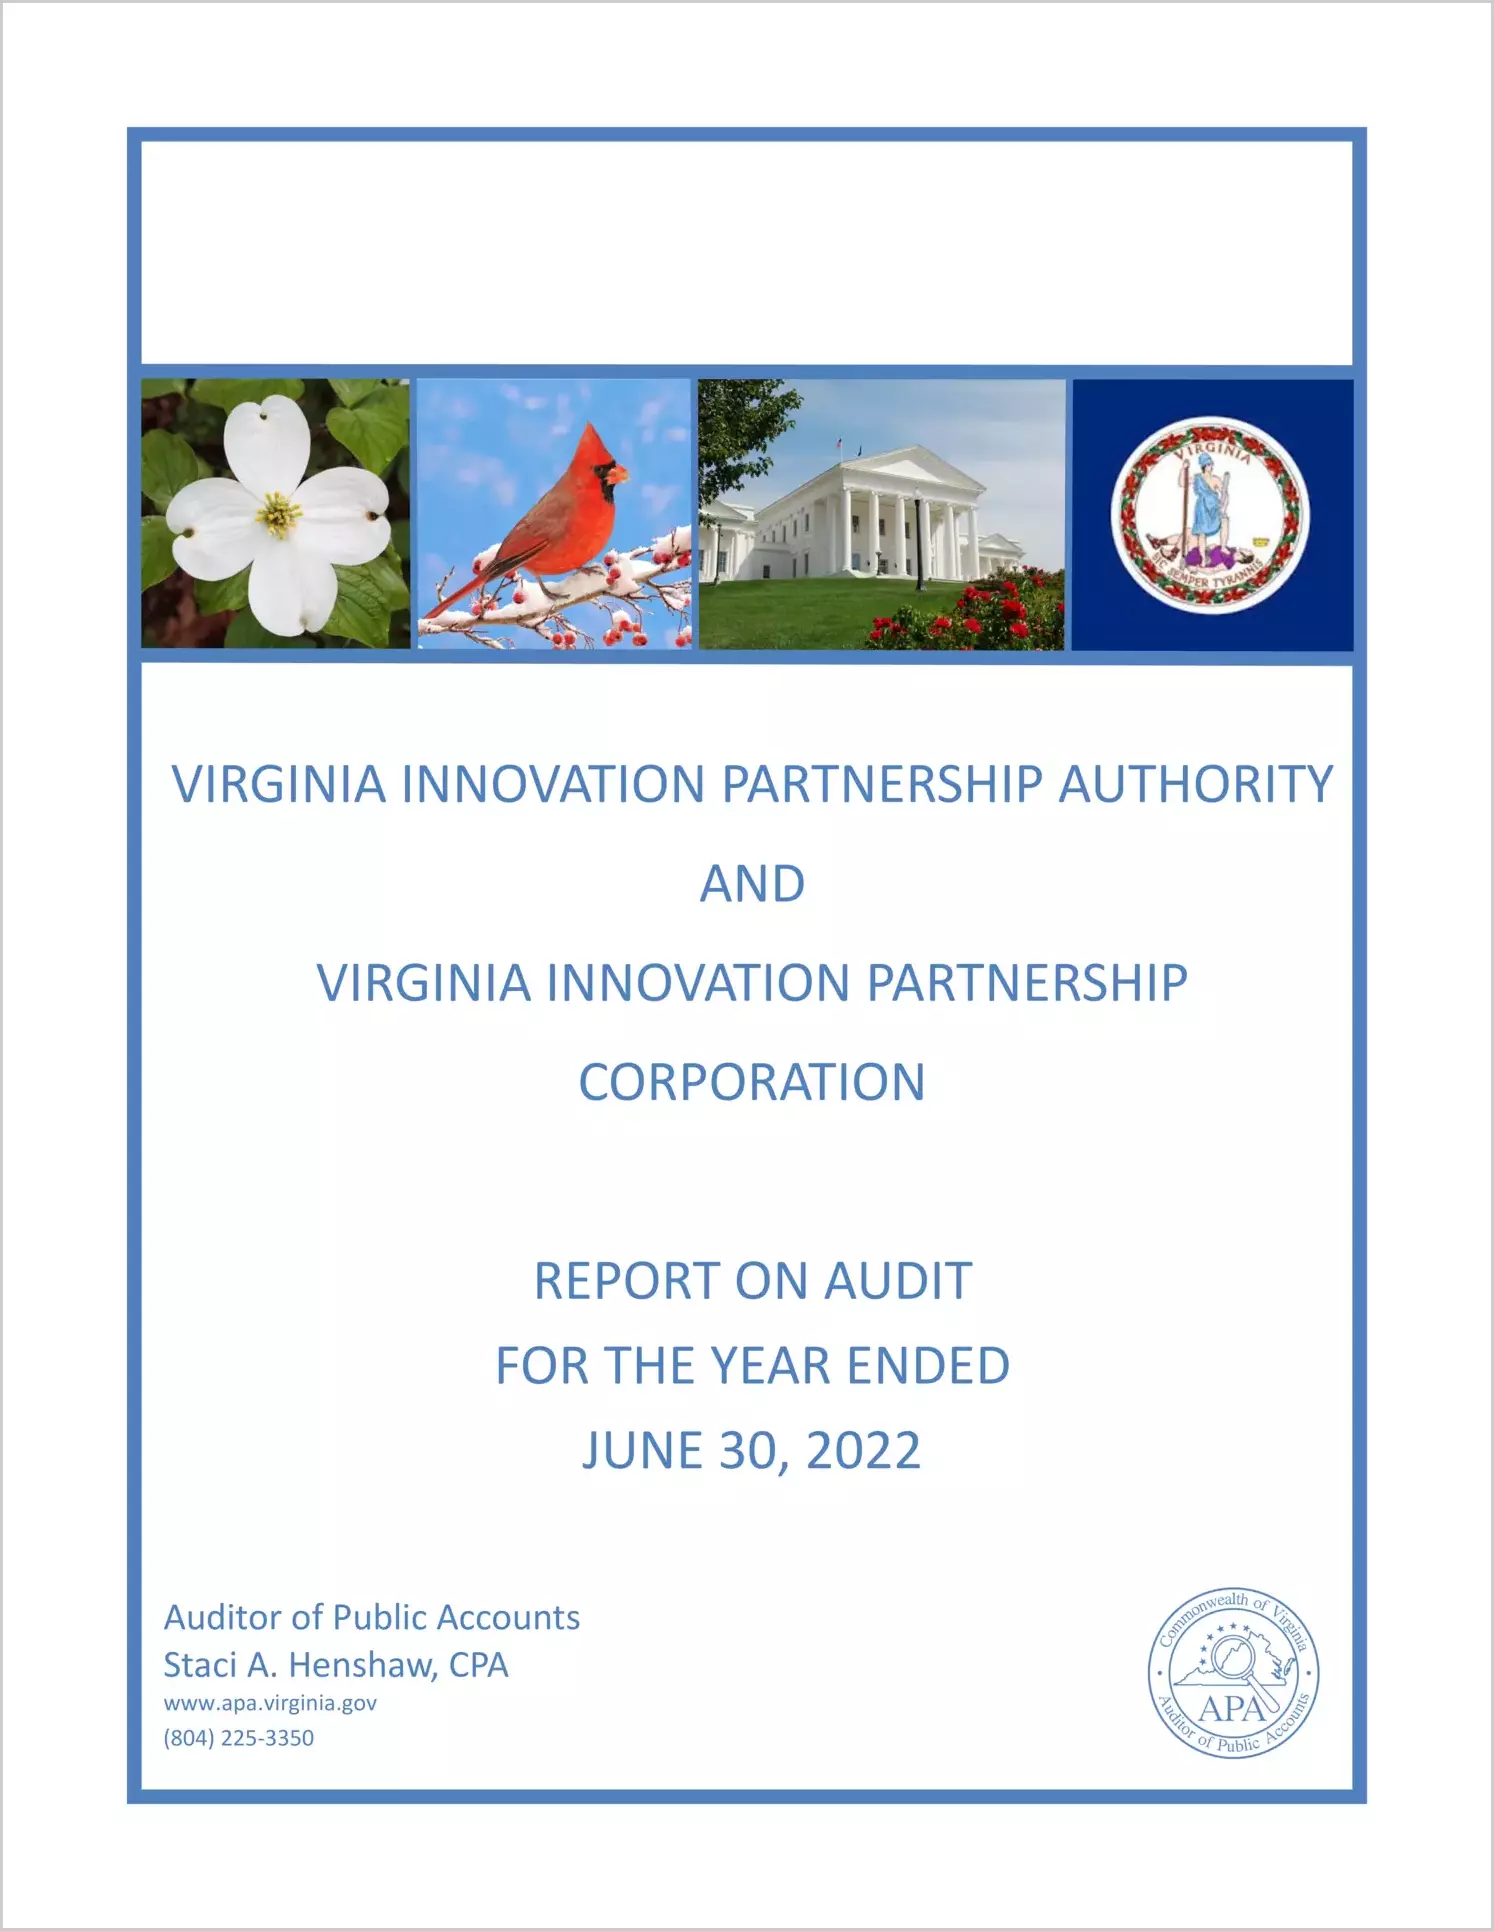 Virginia Innovation Partnership Authority and Virginia Innovation Partnership Corporation for the year ended June 30, 2022